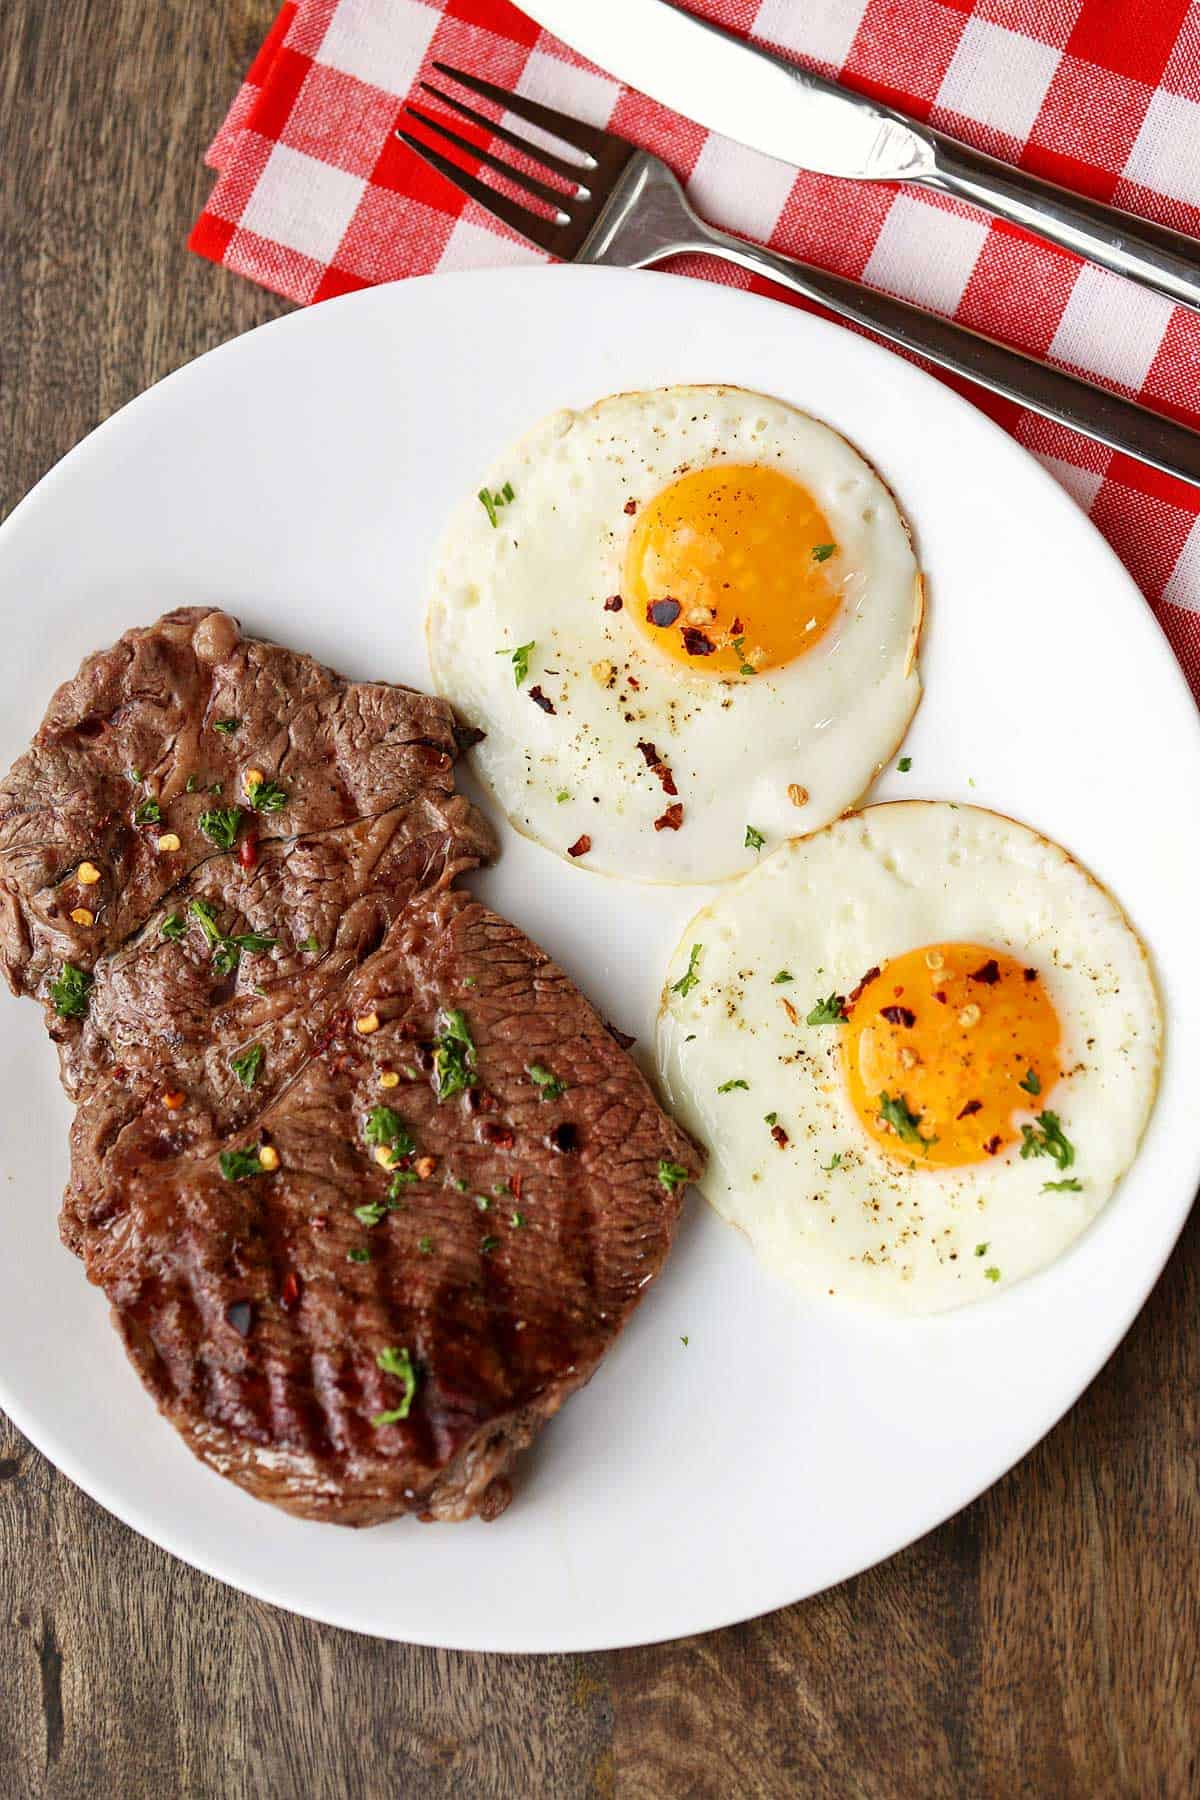 Steak and eggs are served on a white plate with a knife and fork.